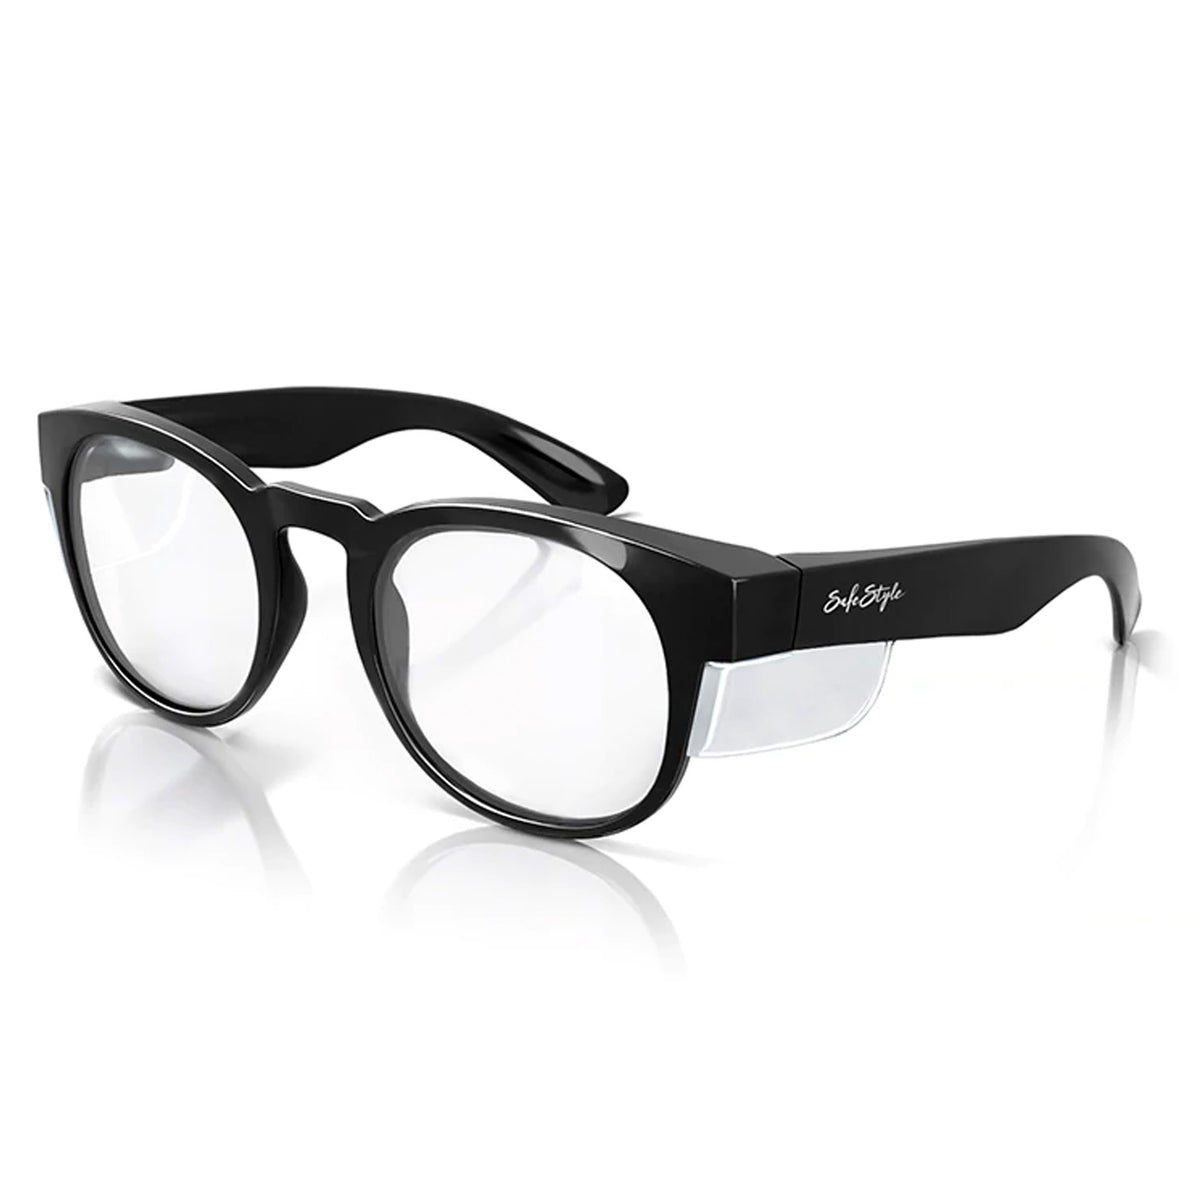 safestyle cruisers black frame safety glasses with clear lens